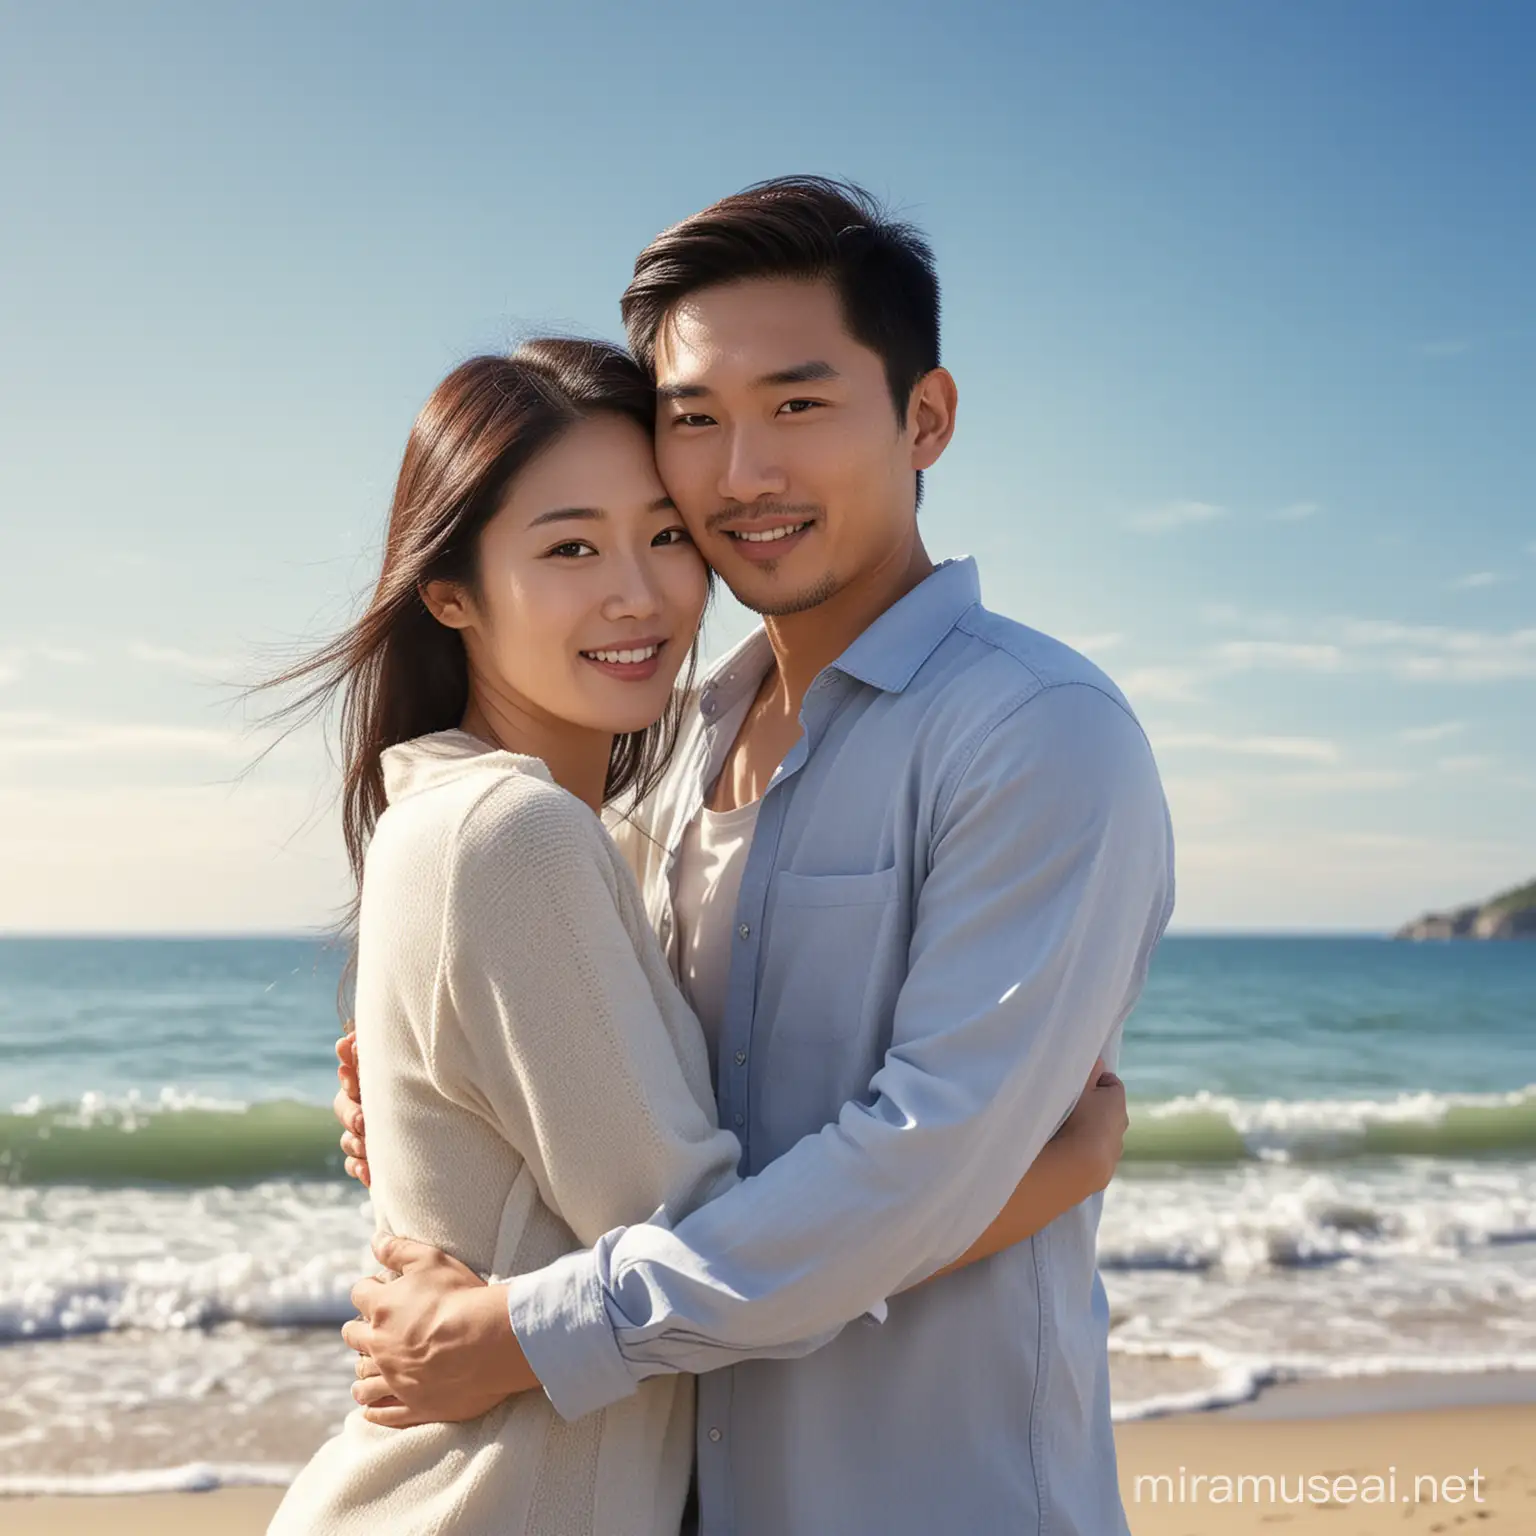 generate image, an asian couple, 30 years old, hug, romatic, realistic. Background a beach, blue sky.